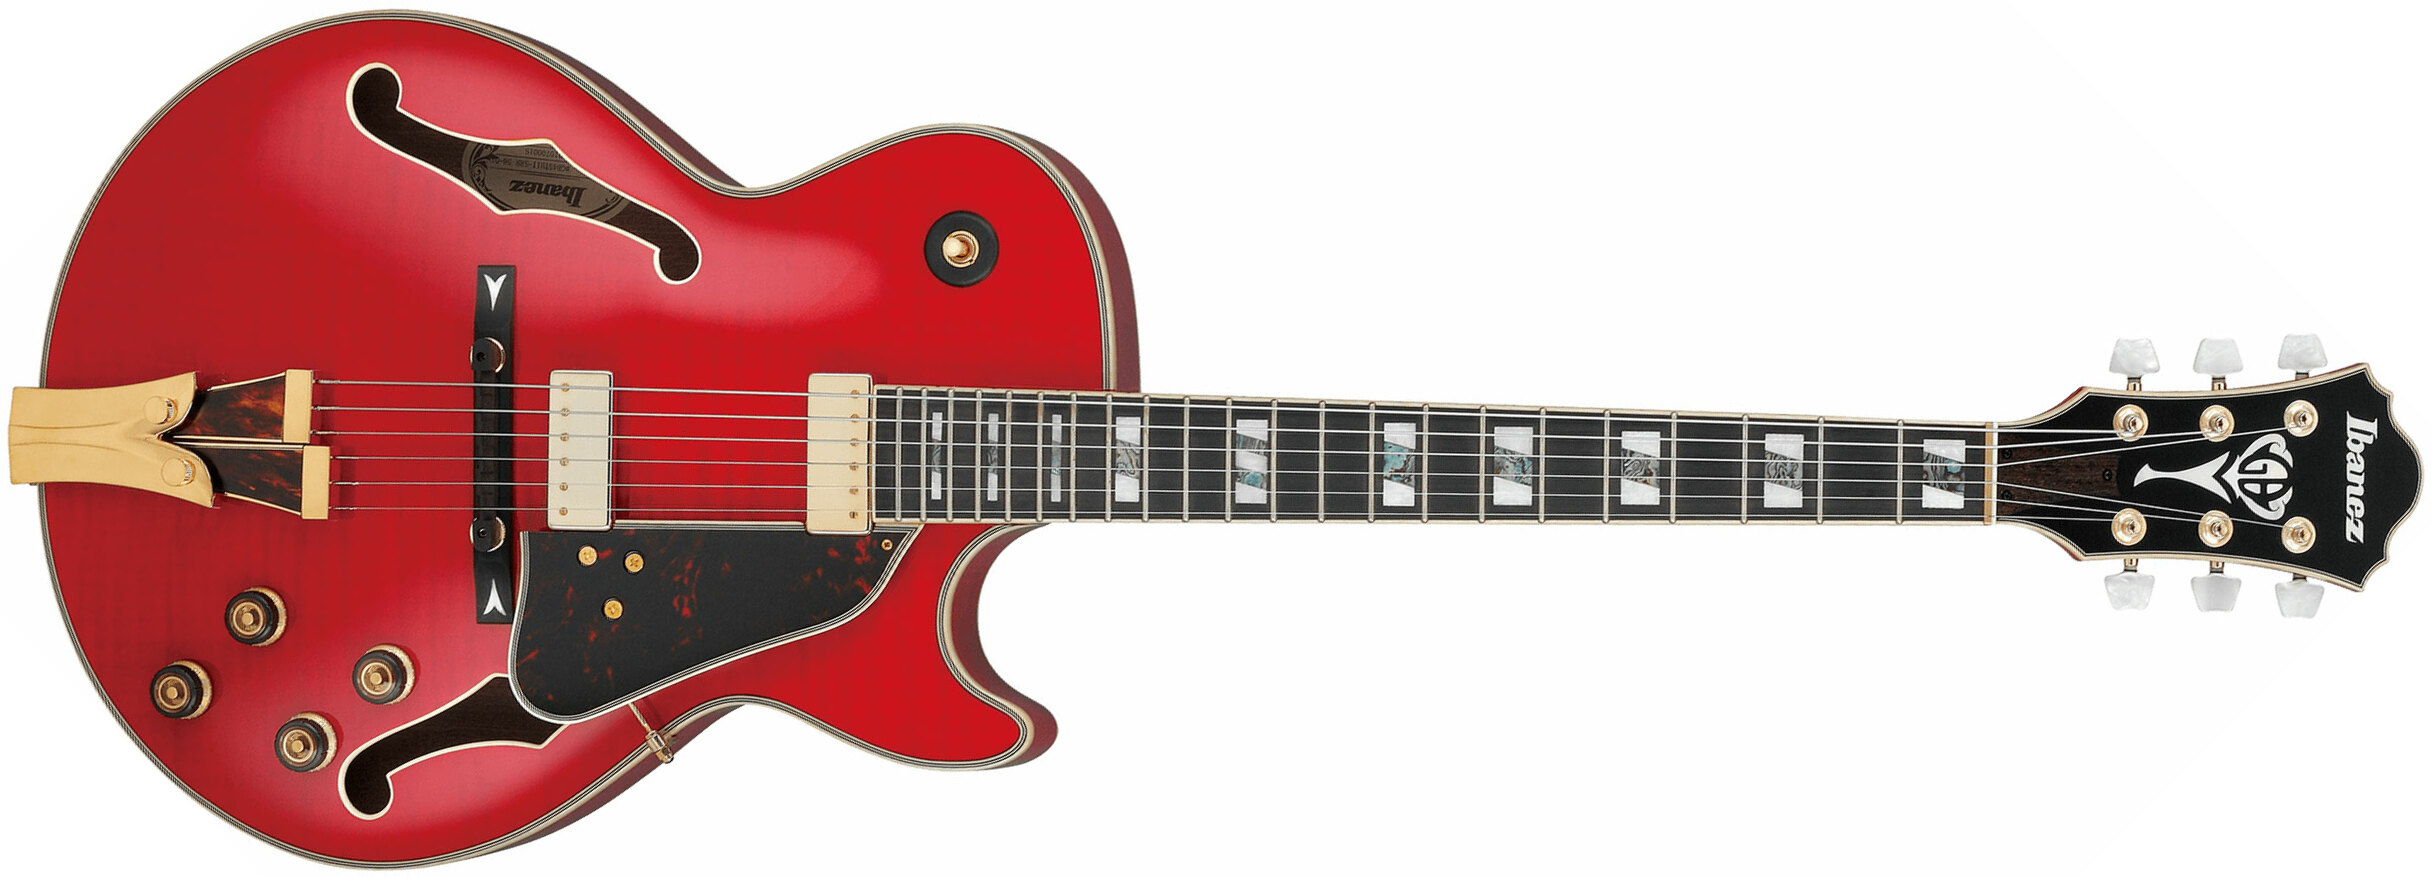 Ibanez George Benson Gb10sefm Srr Signature Hh Ht Eb - Sapphire Red - Hollow-body electric guitar - Main picture